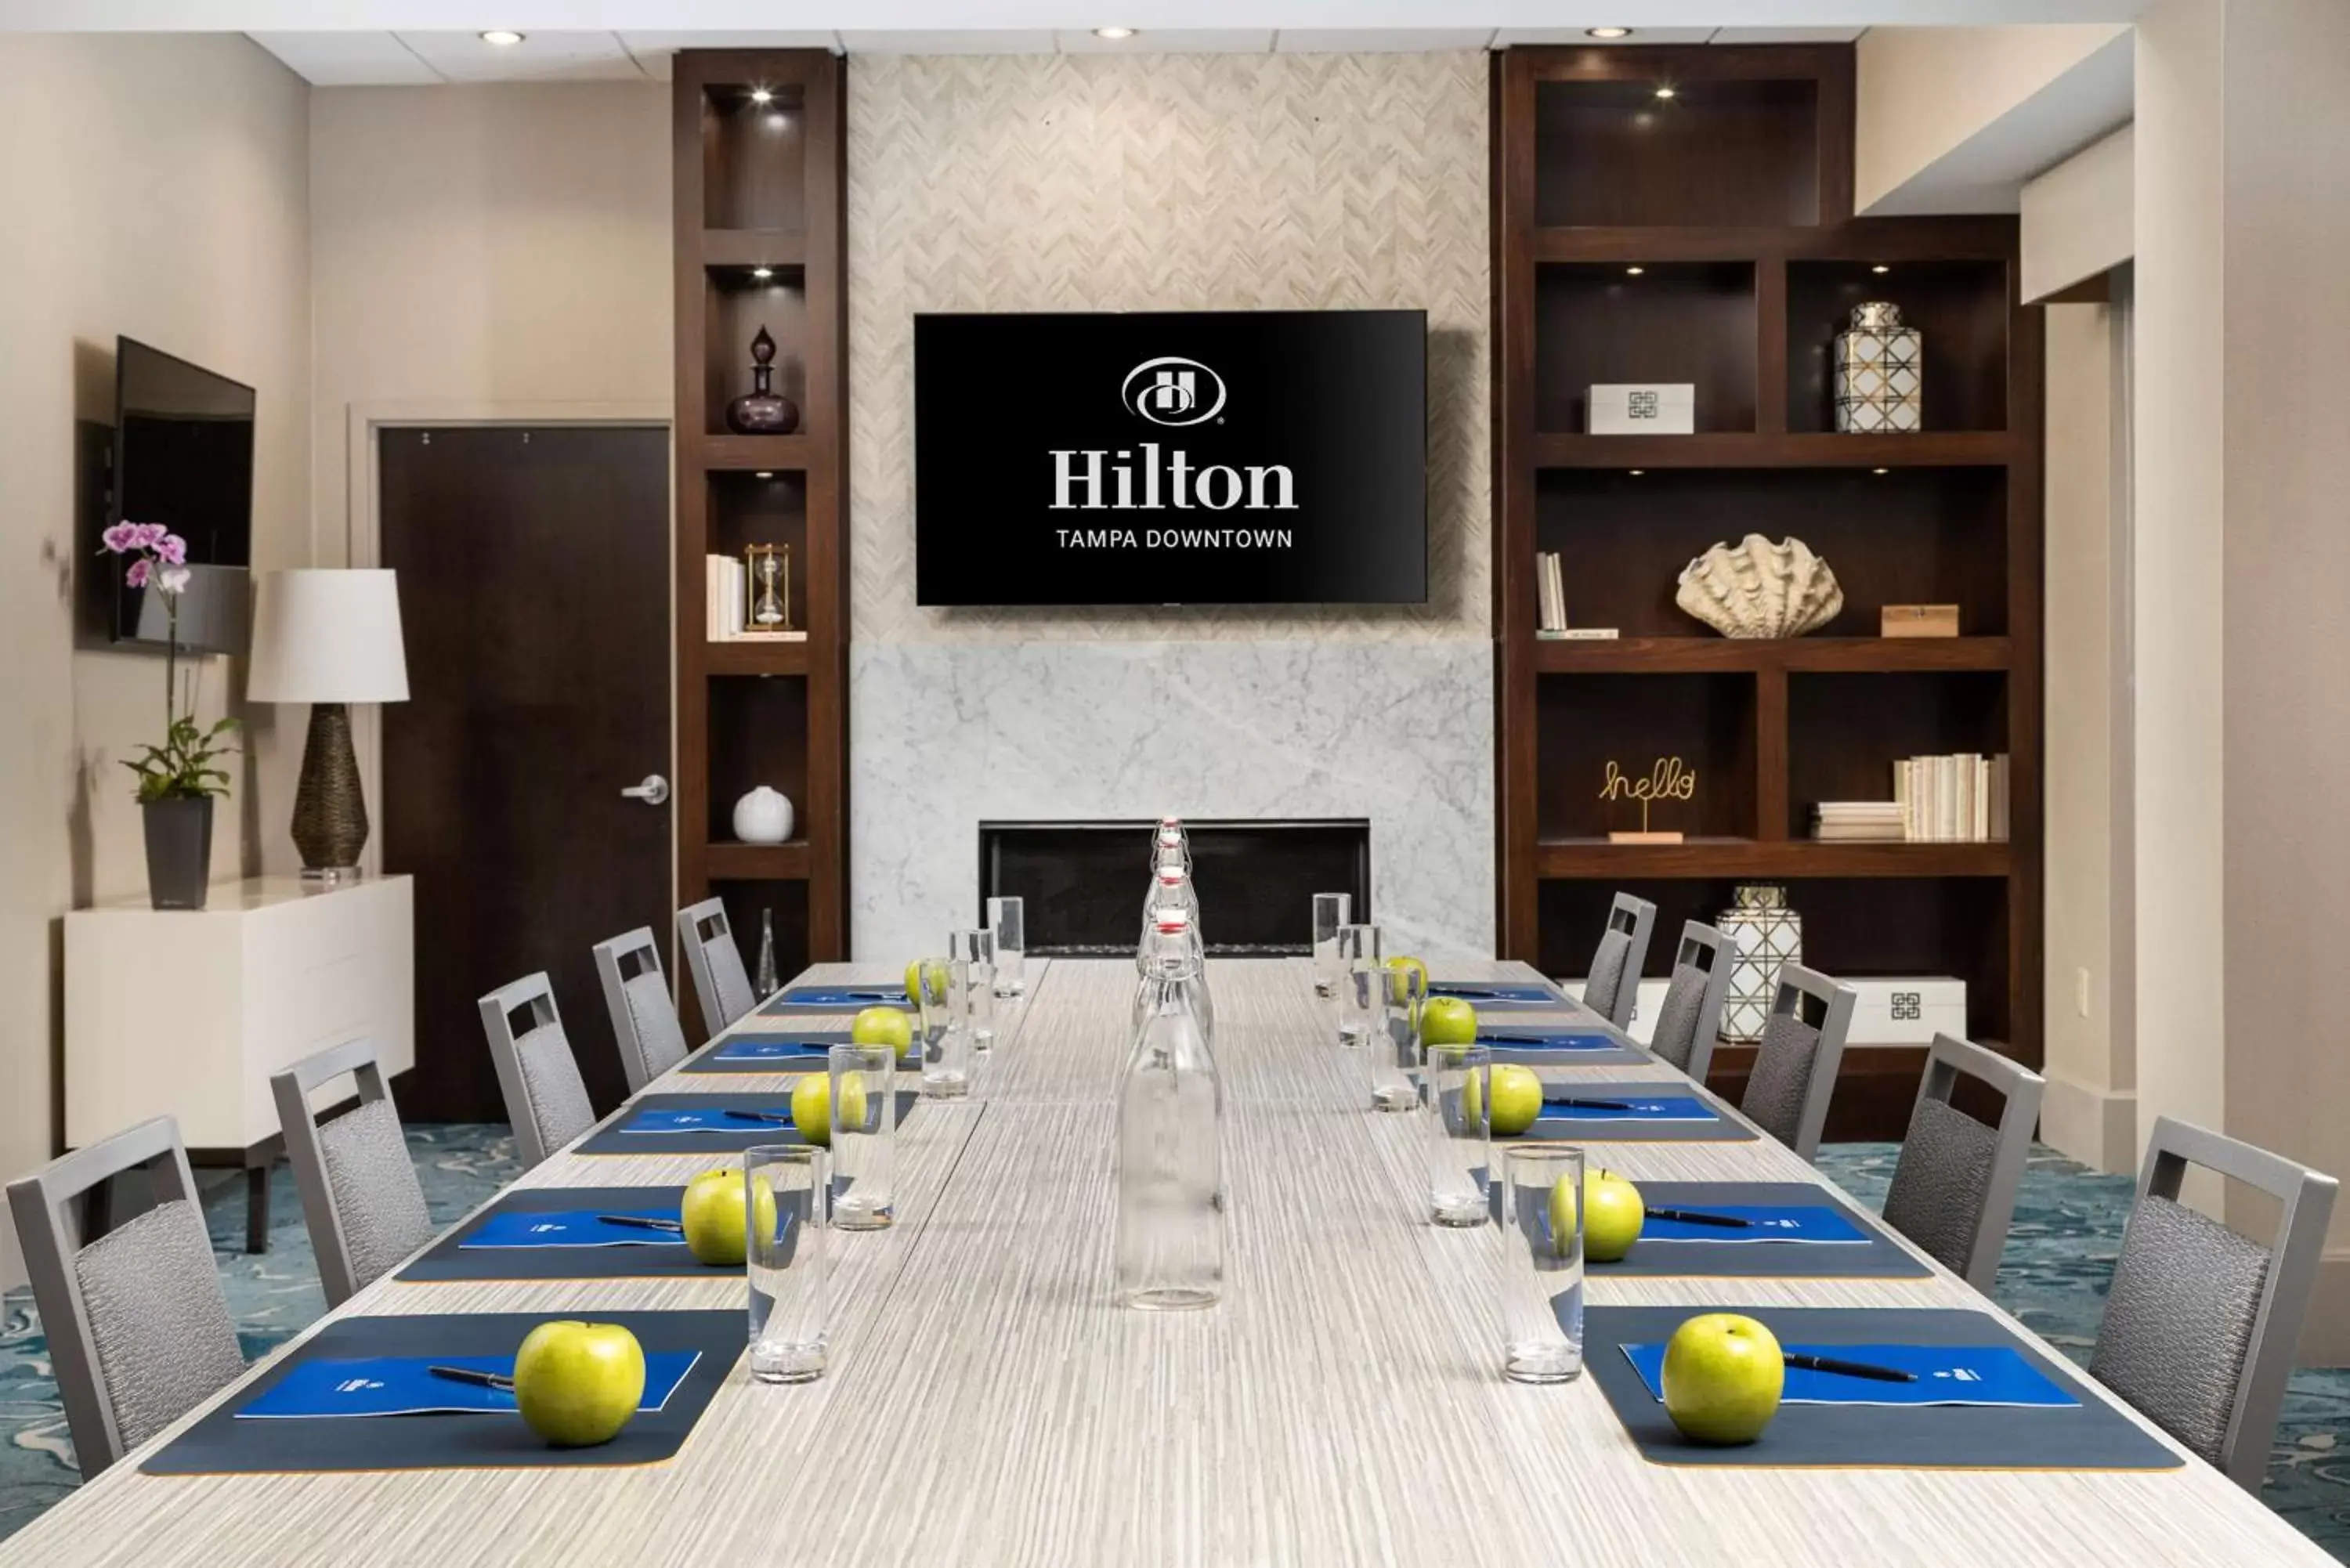 Meeting/conference room in Hilton Tampa Downtown